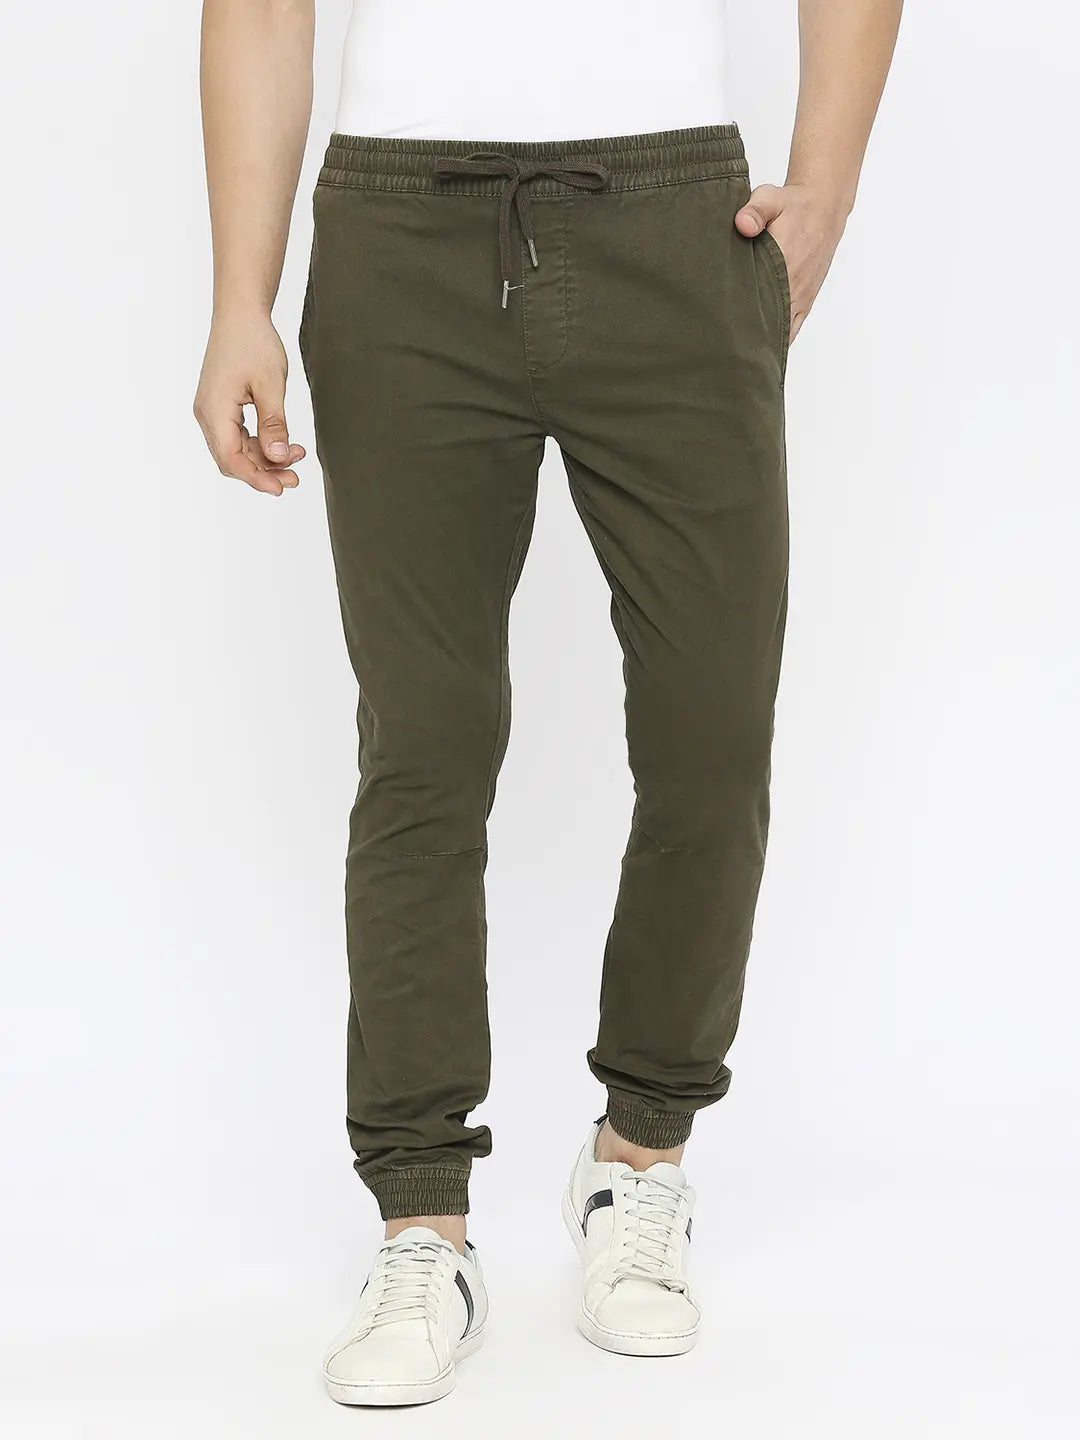 Buy U.S. Polo Assn. Denver Slim Fit Textured Casual Trousers - NNNOW.com